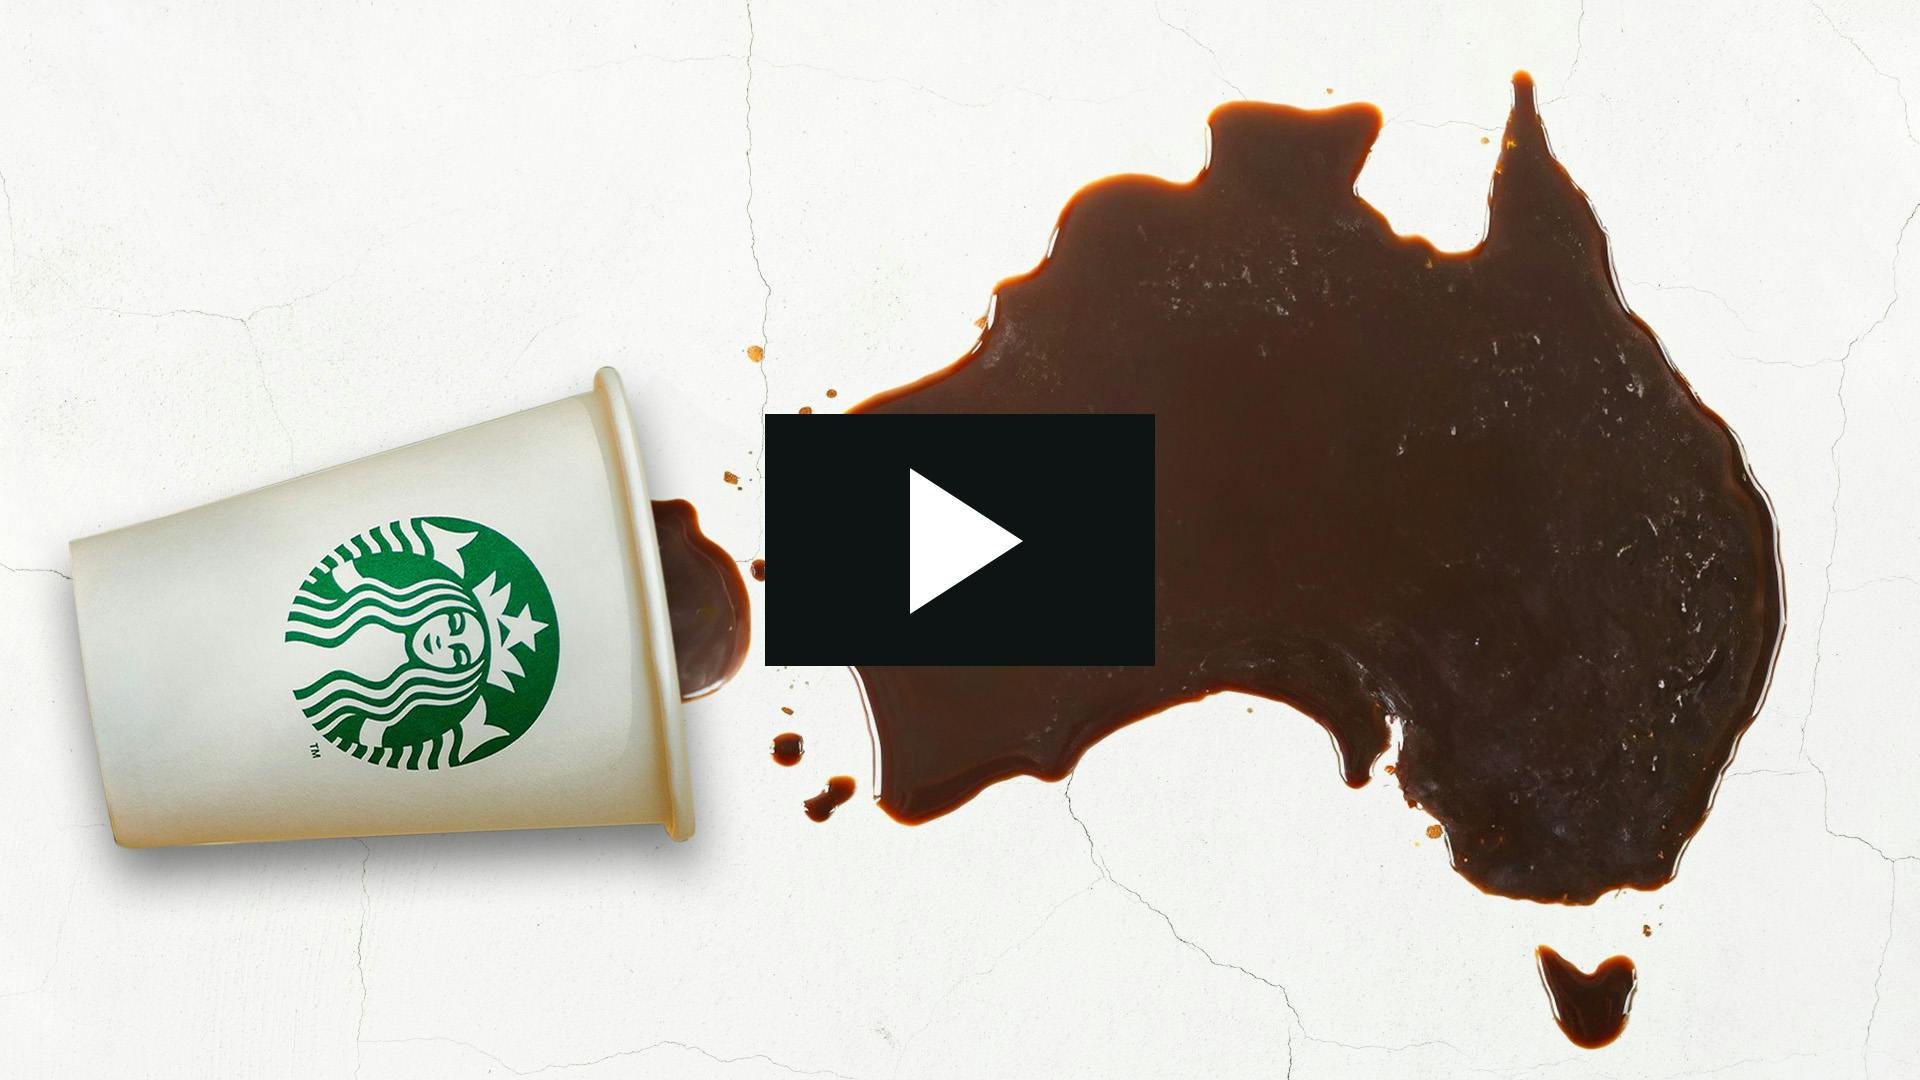 Starbucks coffee cup spilling coffee in the shape of Australia